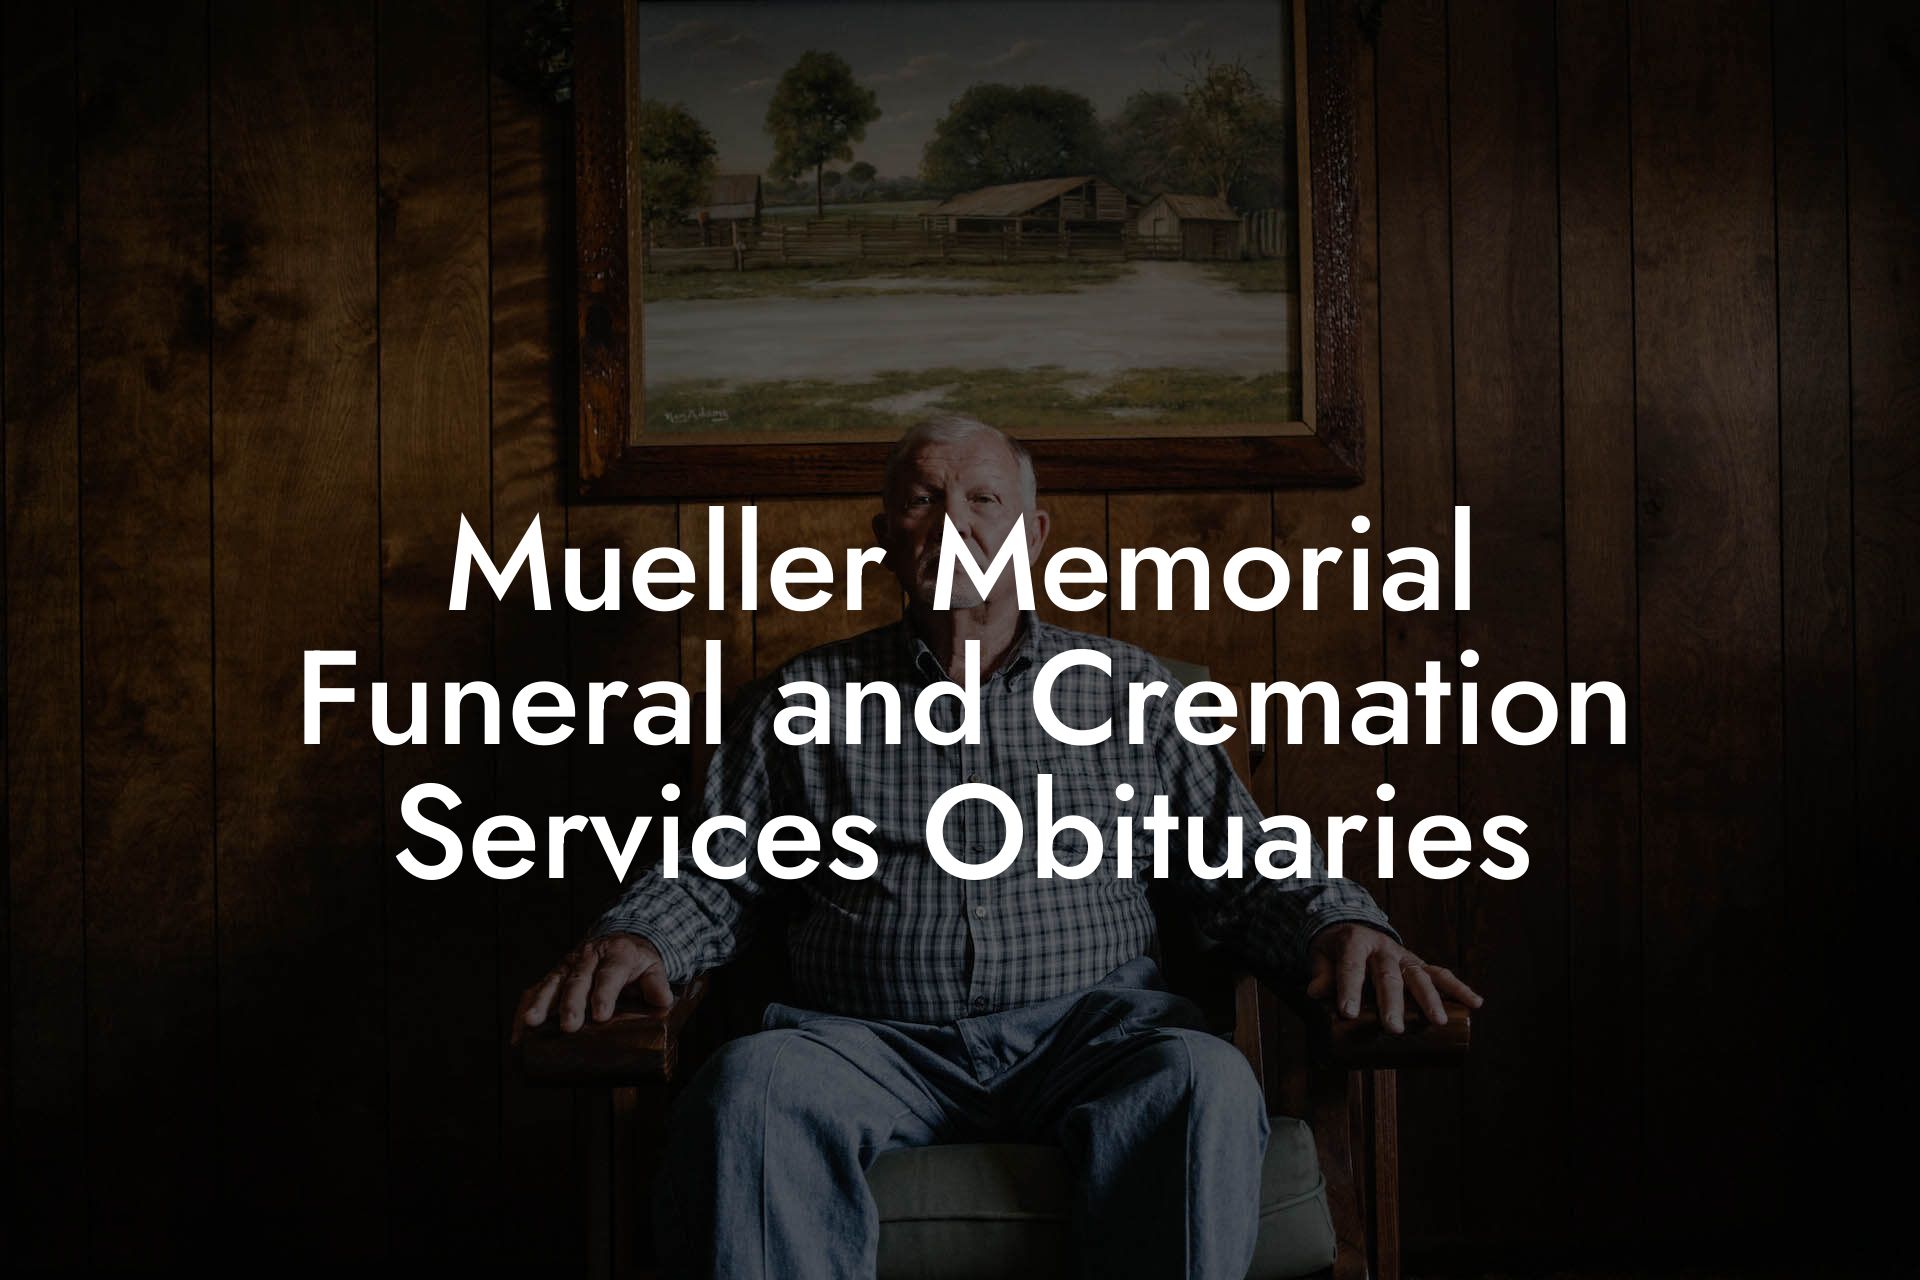 Mueller Memorial Funeral and Cremation Services Obituaries